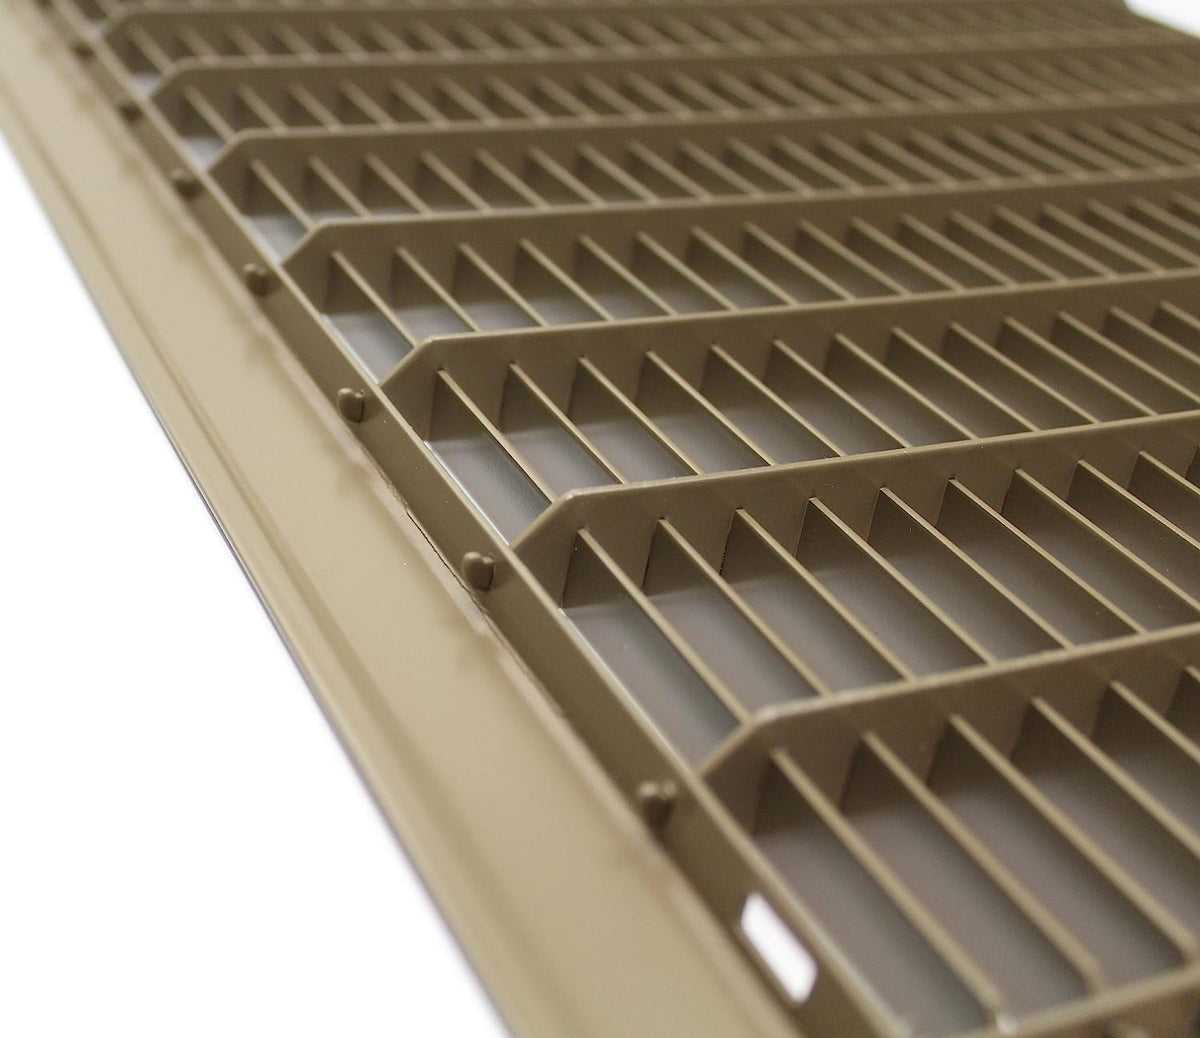 12&quot; X 24&quot; or 24&quot; x 12&quot; Heavy Duty Floor Grille - Fixed Blades Air Grille - Brown [Outer Dimensions: 13.75 X 25.75]